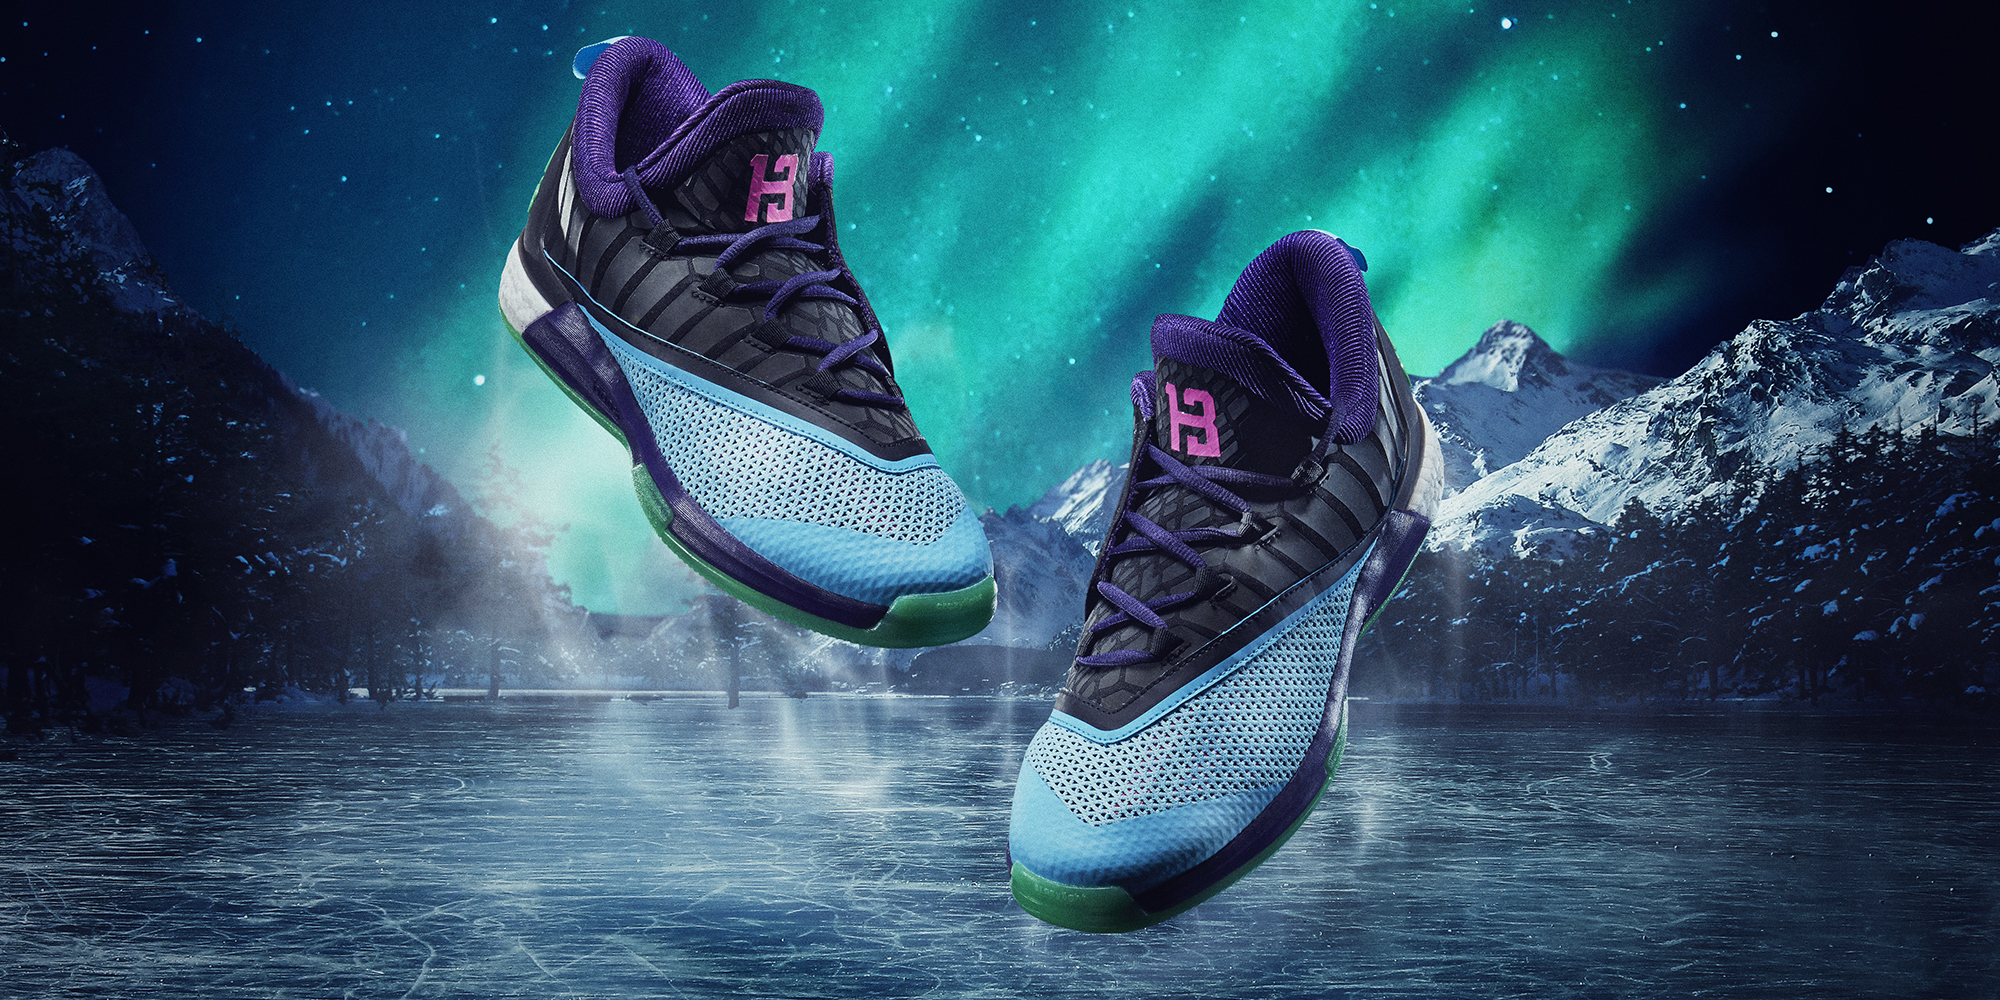 adidas Unveils James Harden Crazylight Boost 2.5 PE for the NBA All-Star Game